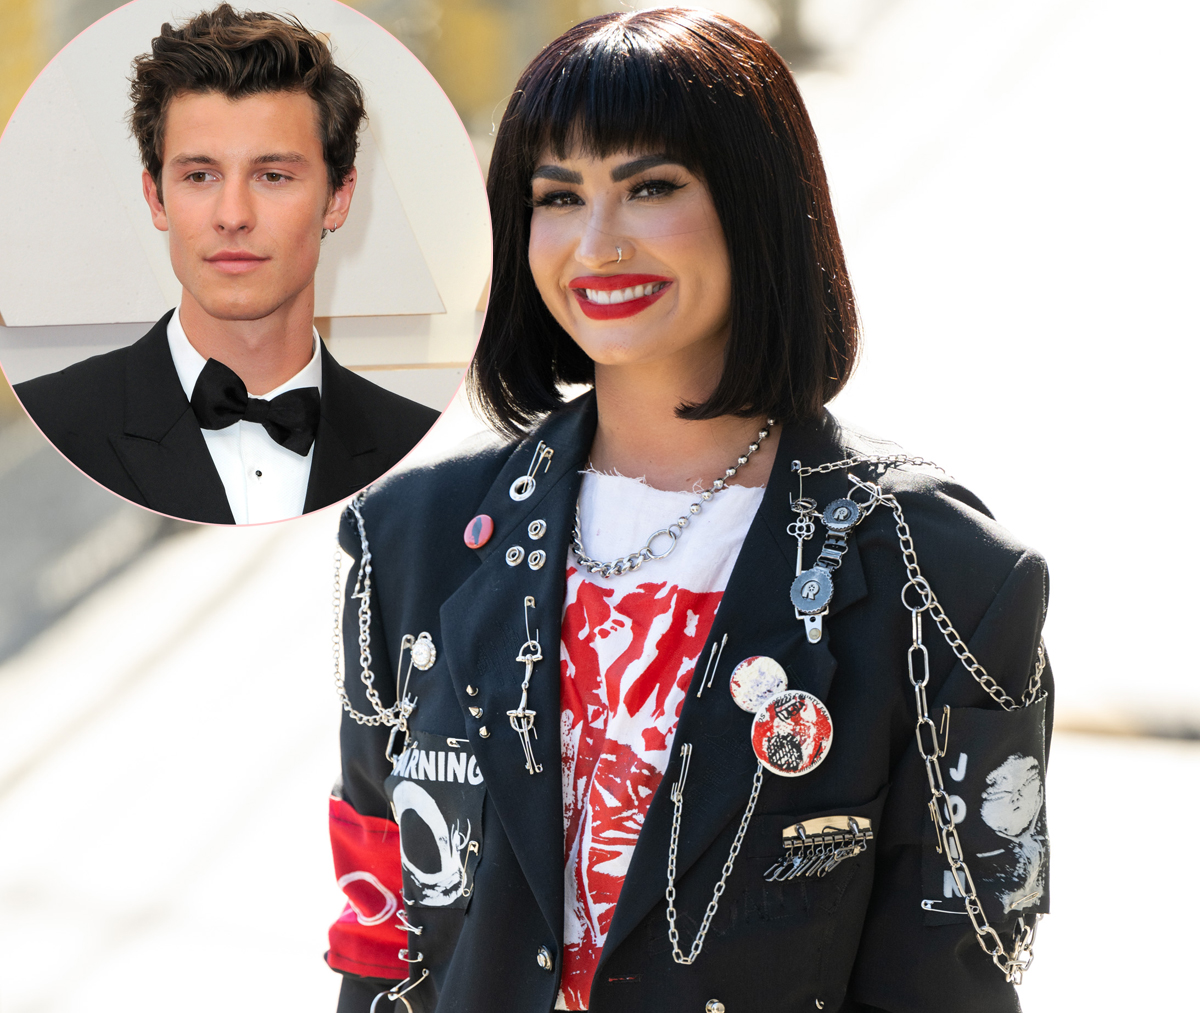 #Demi Lovato Sympathizes With Shawn Mendes For Prioritizing Mental Health Over Career: ‘I Know What It’s Like’